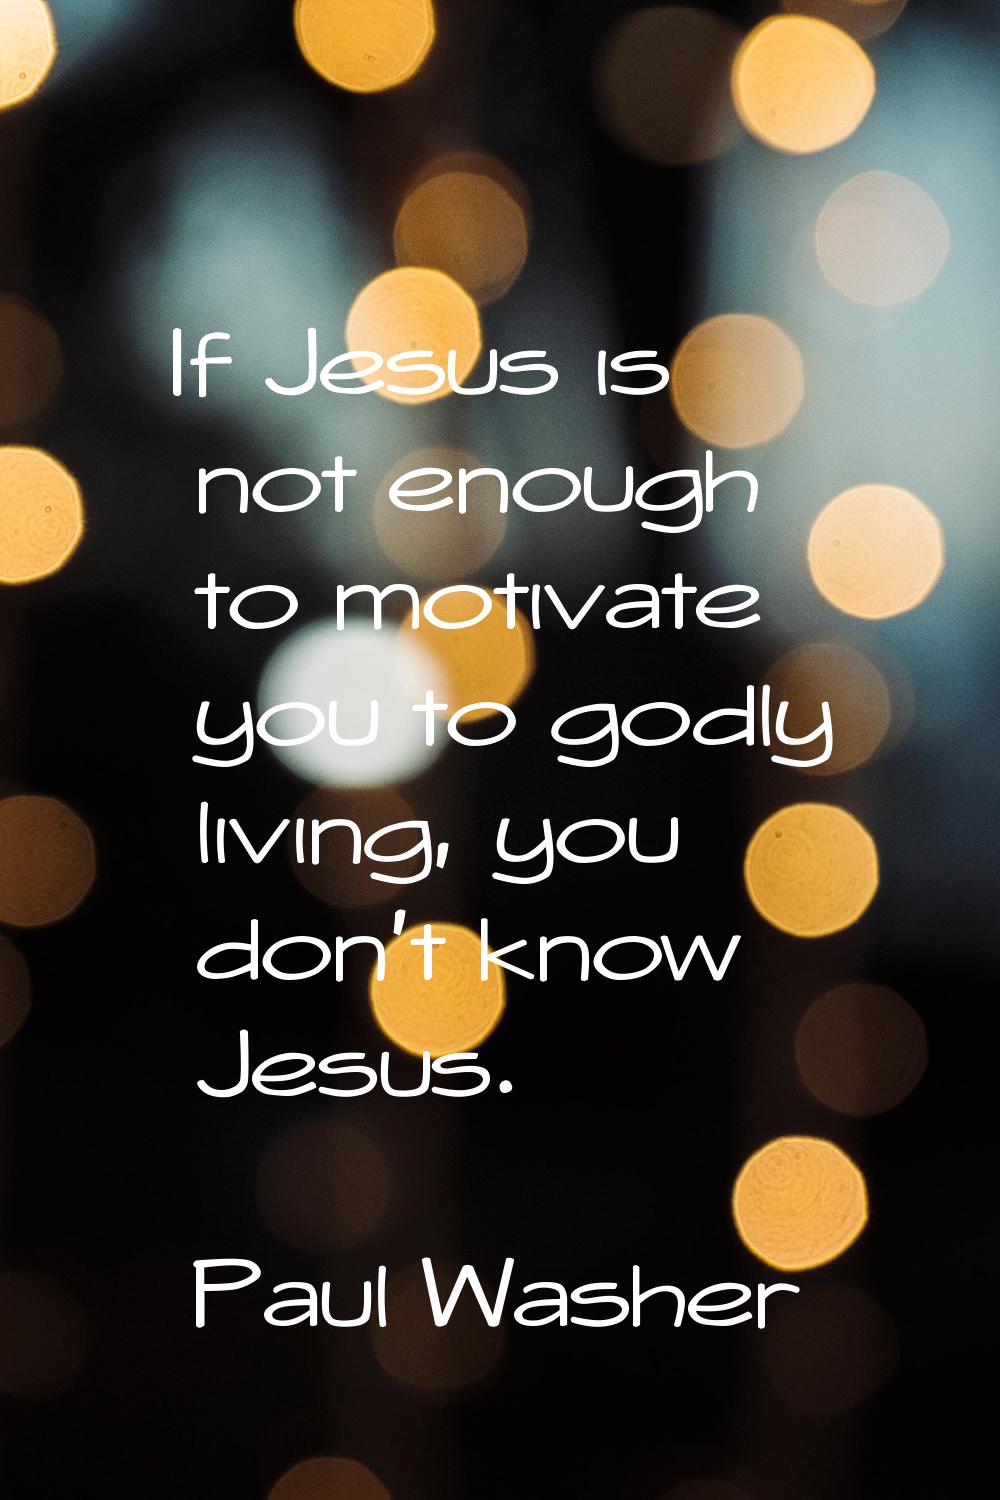 If Jesus is not enough to motivate you to godly living, you don't know Jesus.